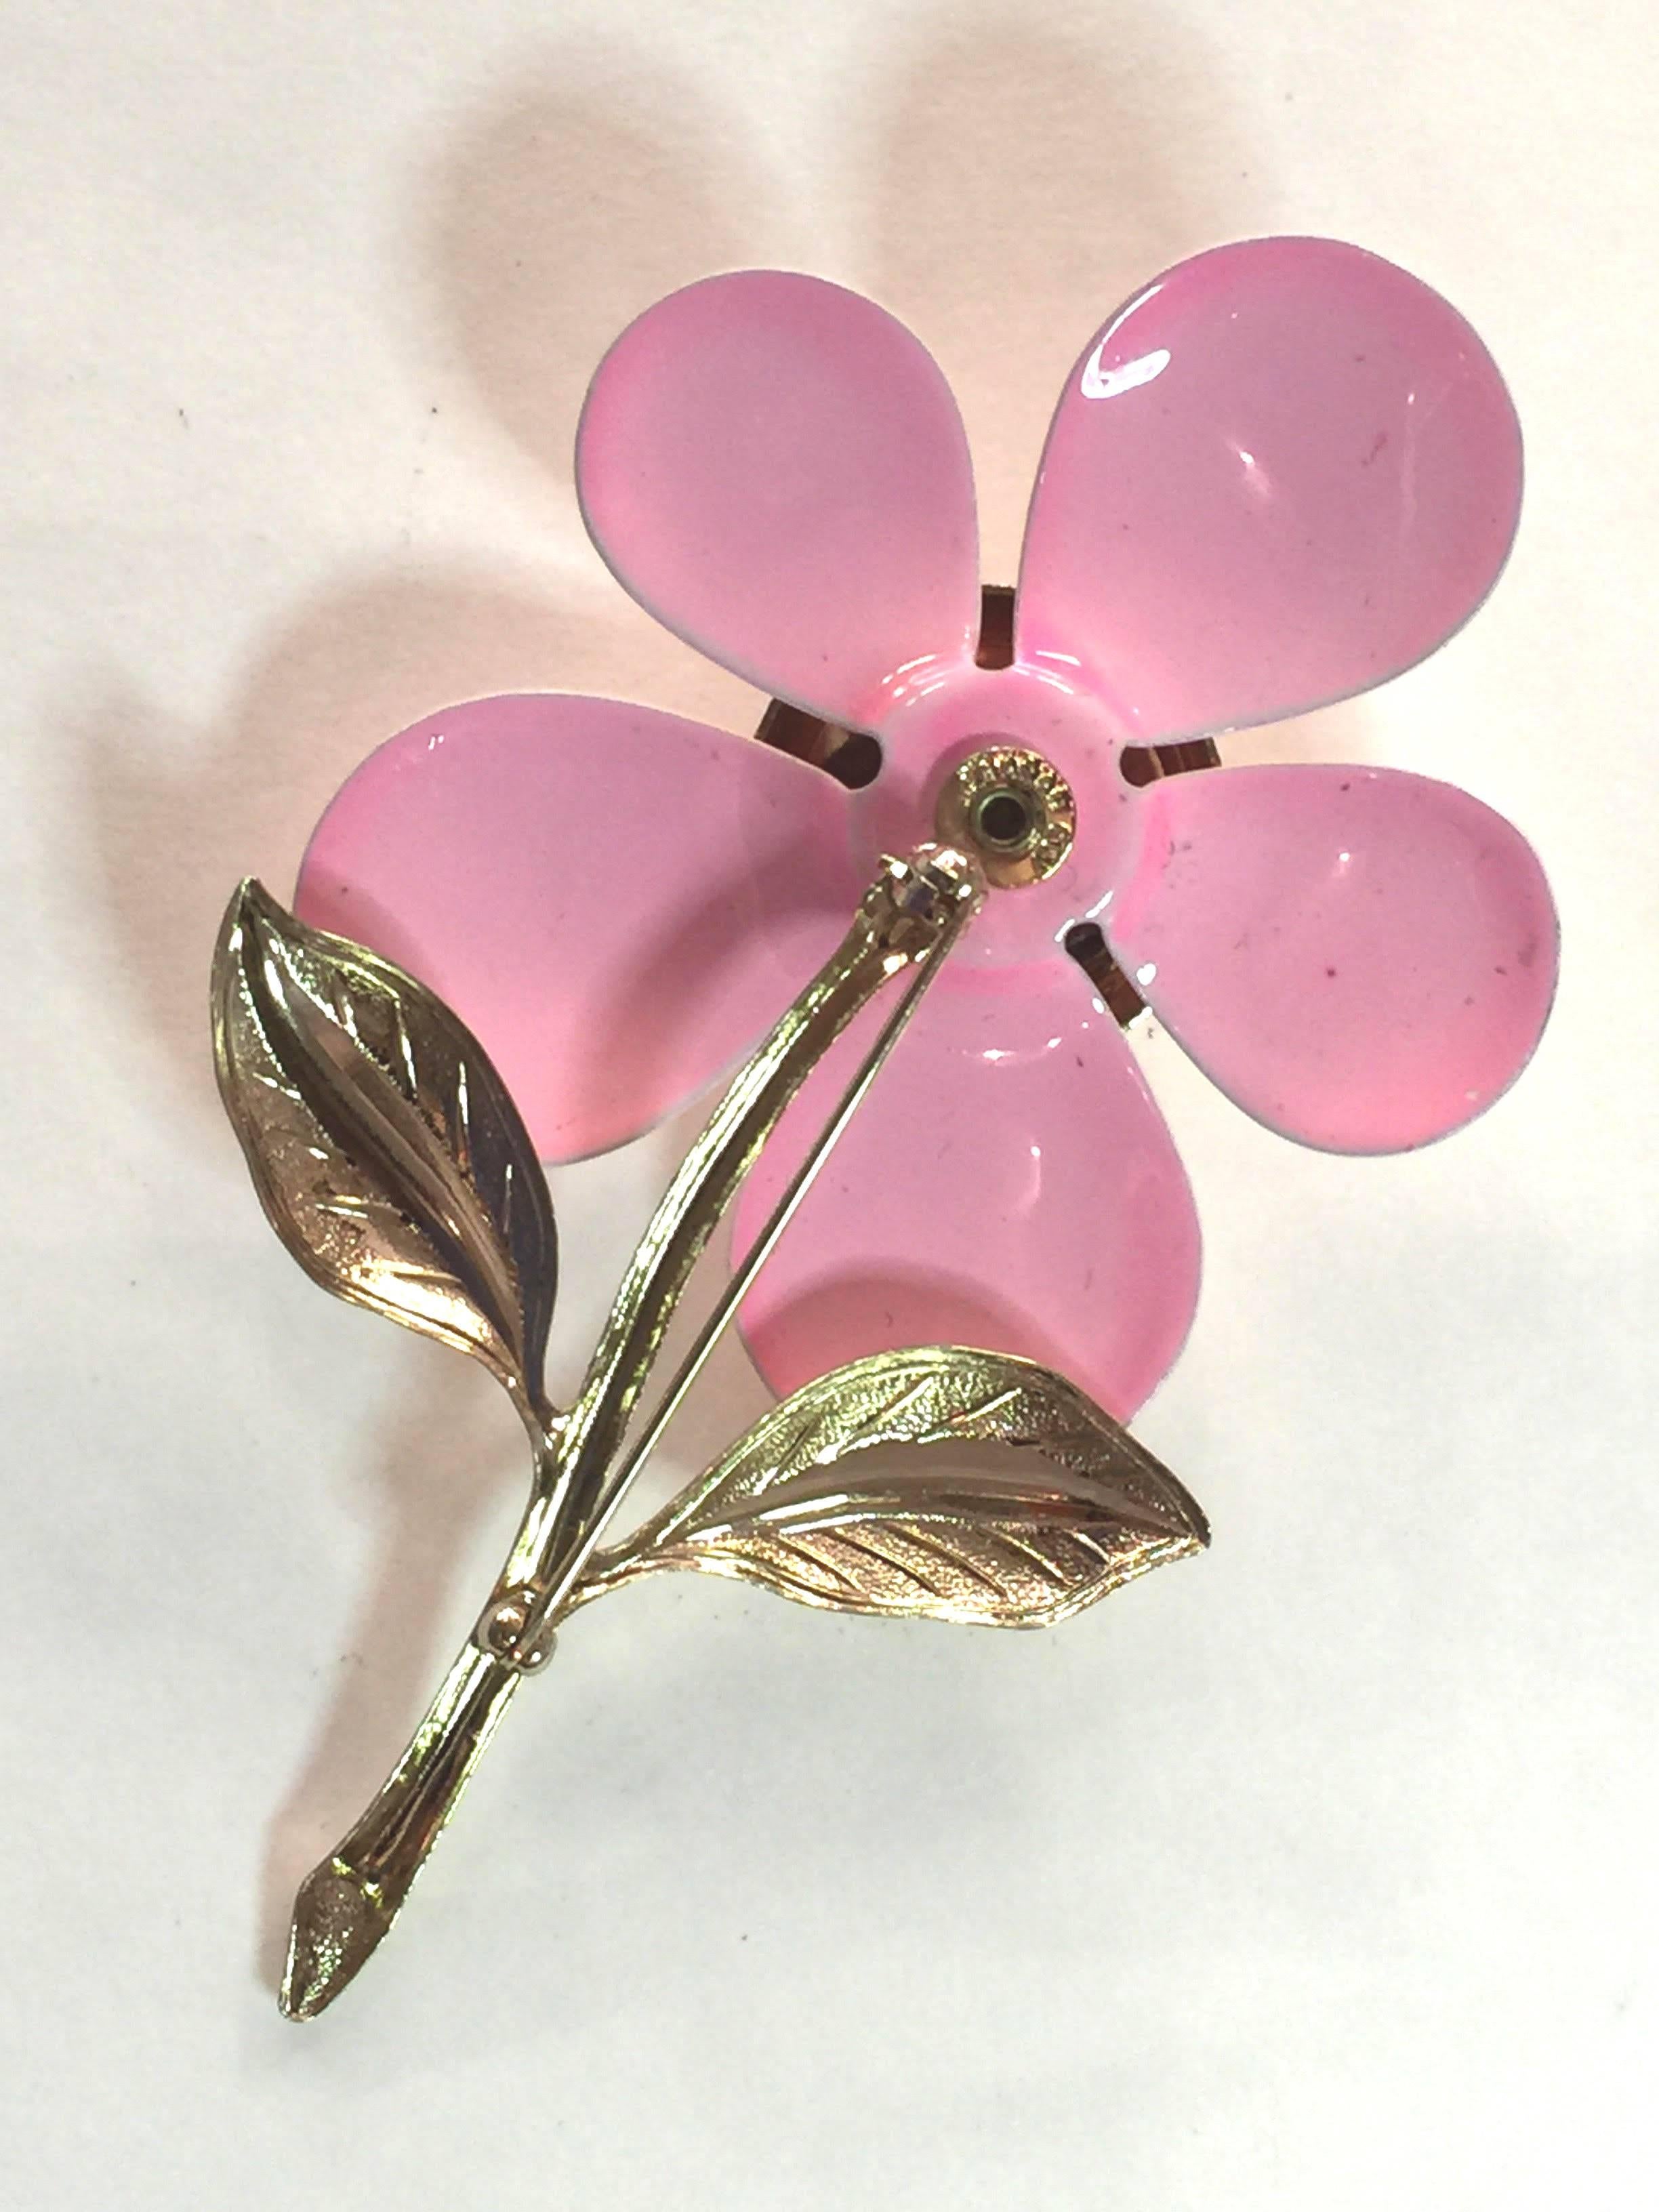 Always fun, always frothy and feminine, this 1960s SARAH COVENTRY Pop  PINK Enamelled Metal Flower Pin Brooch sums up early-mid 60s flower power fun! Approximately 3.25 inches long and 1.5 inches wide at broadest point, the pin sahes ombreeed pinks